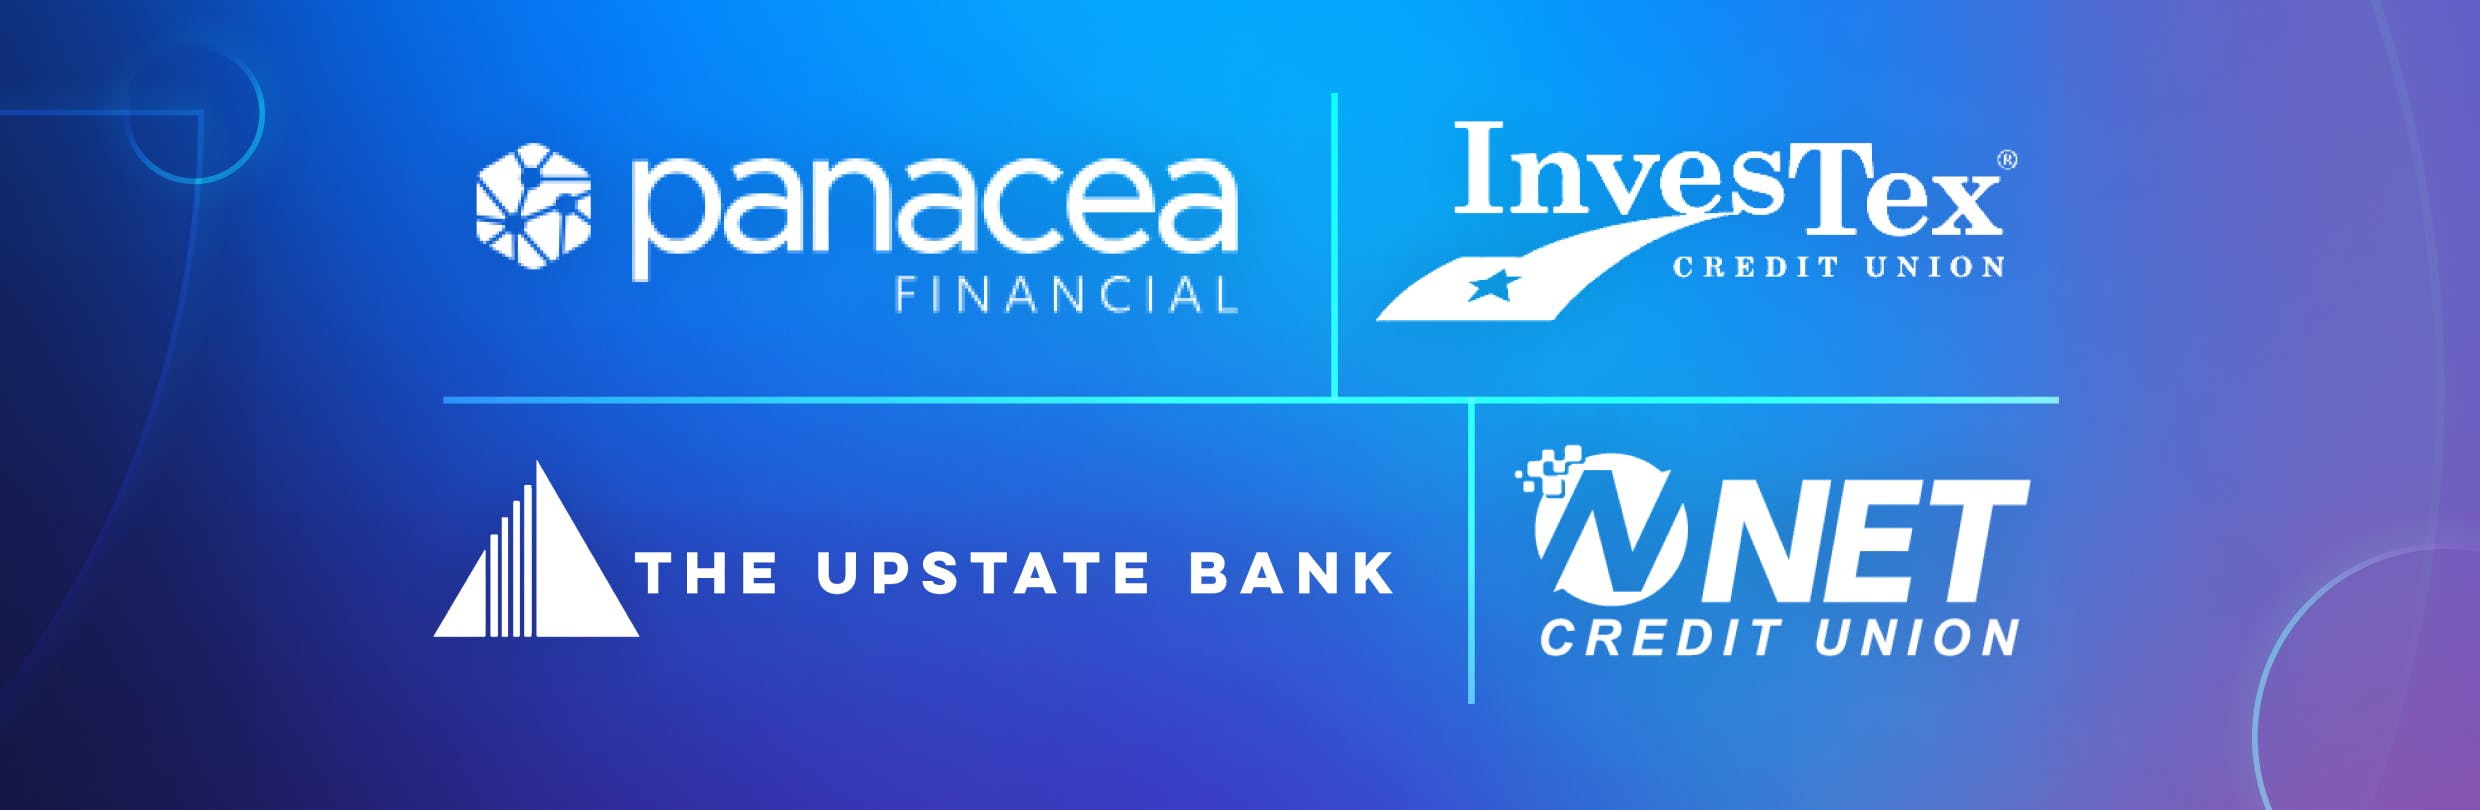 Panacea Financial logo, InvesTex CU logo, The Upstate Bank logo, and Net CU logo in a grid on a colorful background